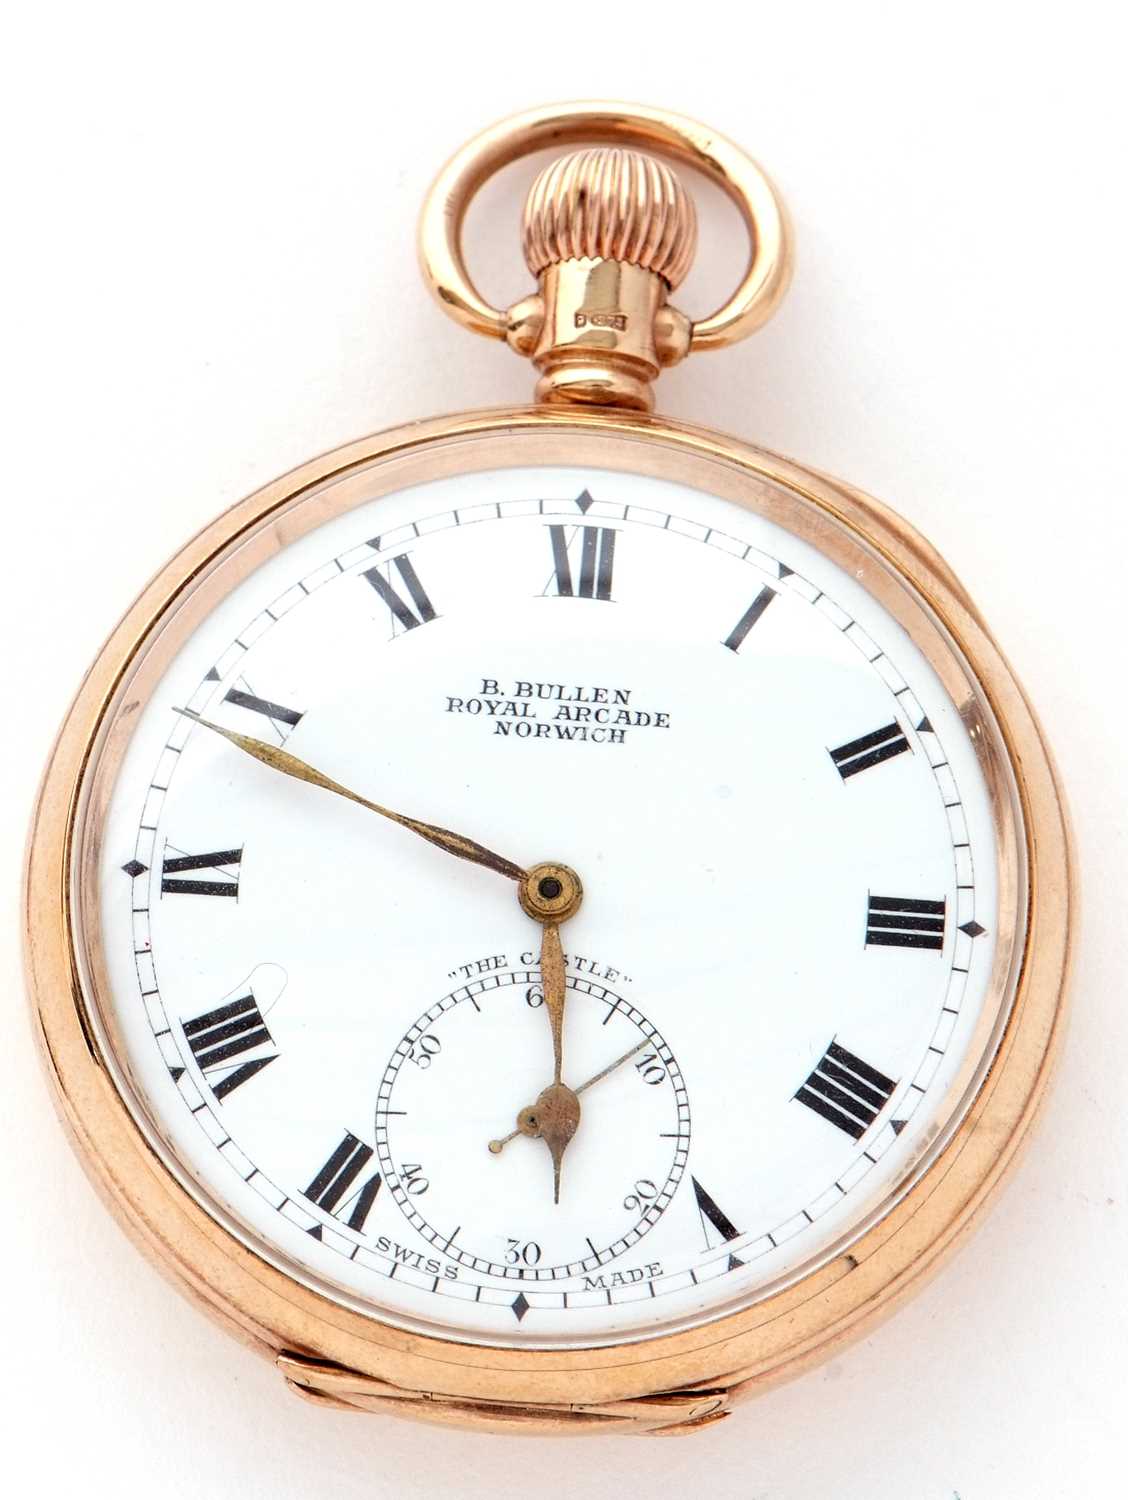 A B Bullen of Norwich 9ct gold open face pocket watch, hallmarked and stamped 375 in the case - Image 3 of 7